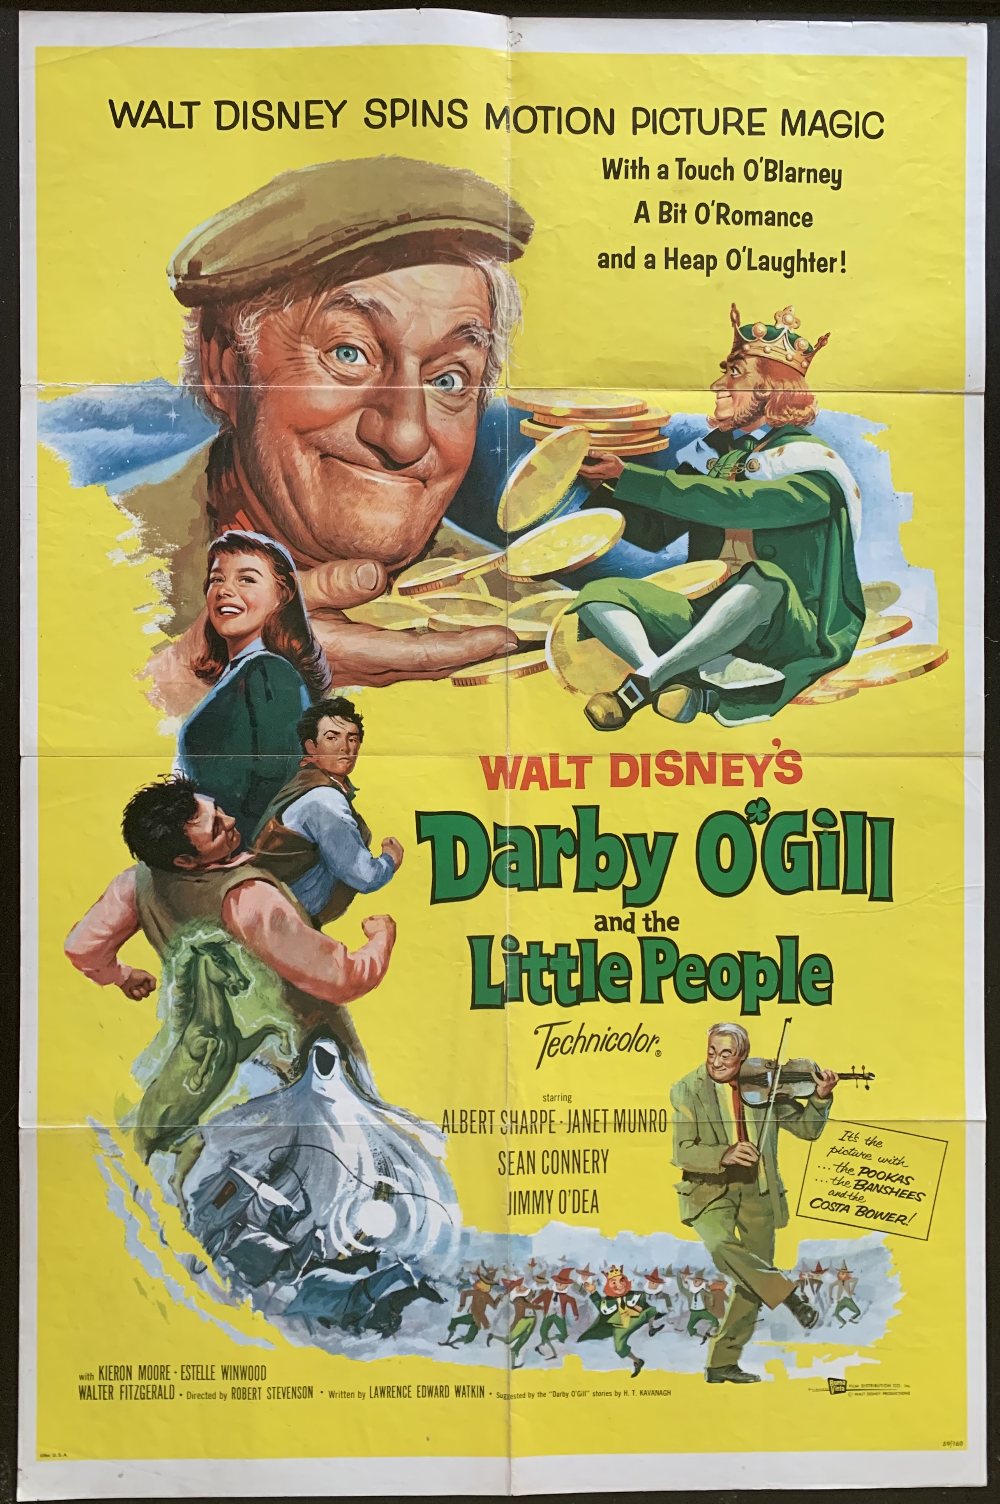 Cinema Poster:  Darby O'Gill and the Little People, [1959] produced by Walt Disney, directed by